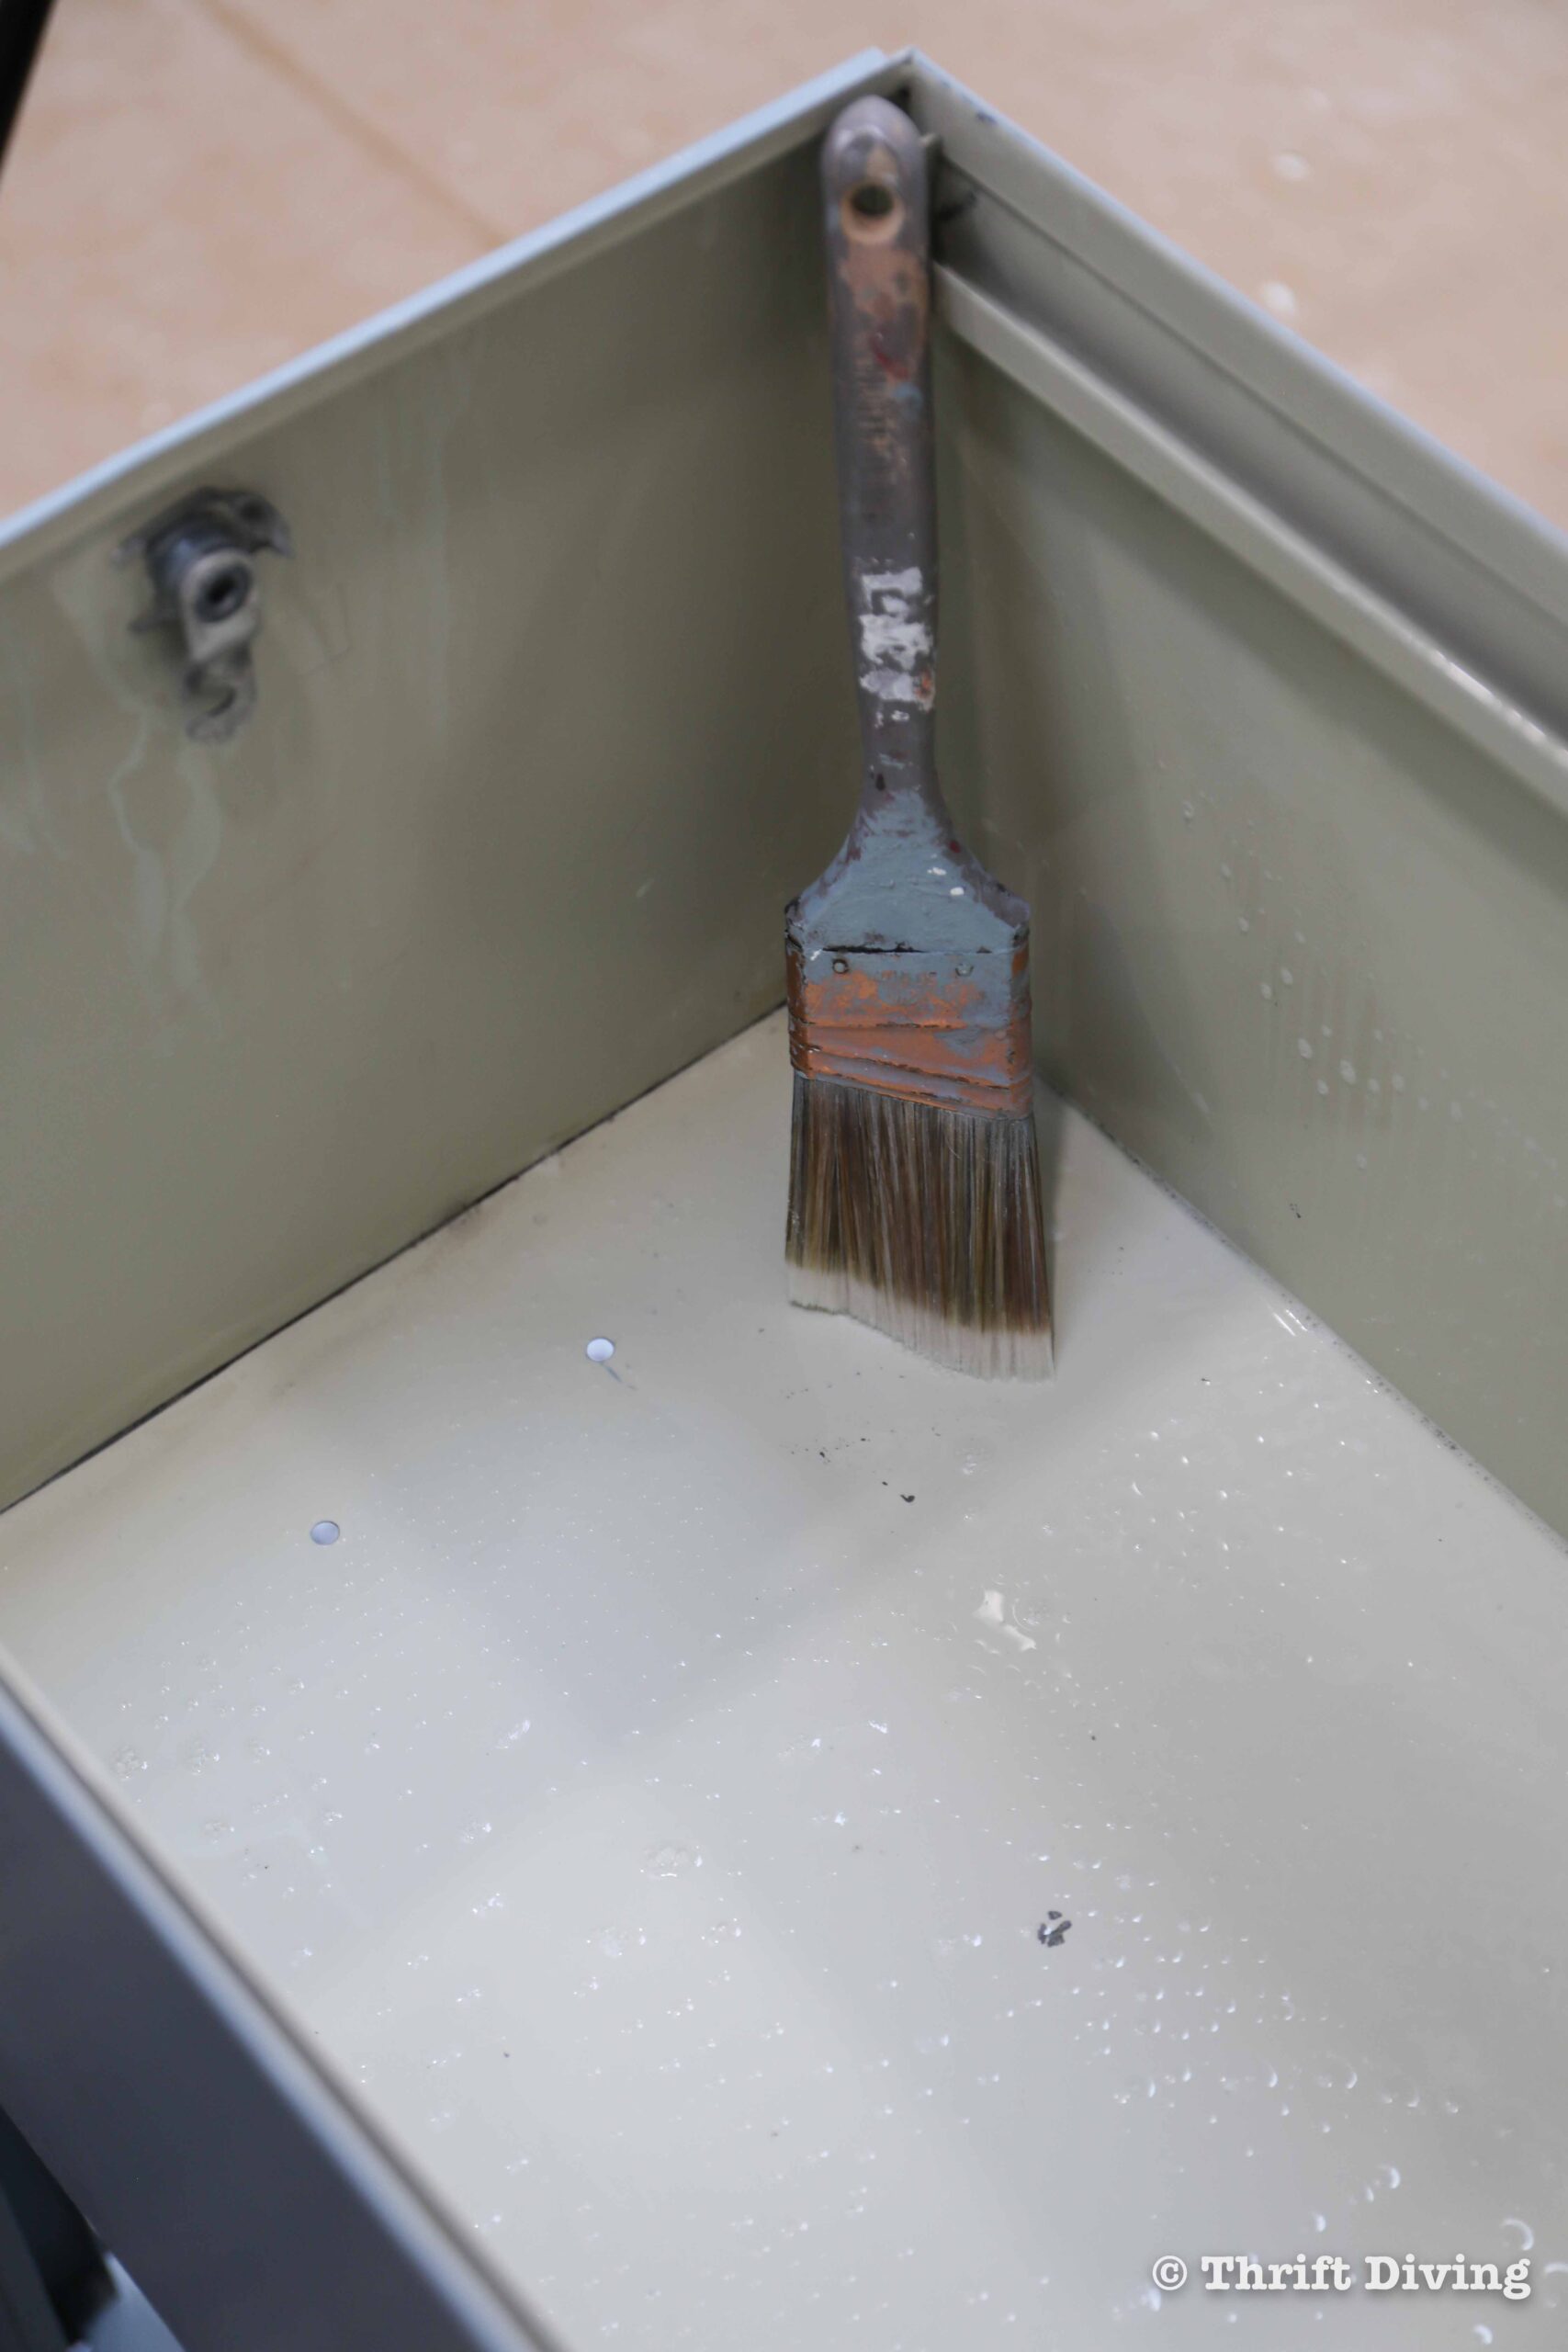 How to Paint a Metal File Cabinet - Use deglosser on metal before painting for good adhesion. - Thrift Diving